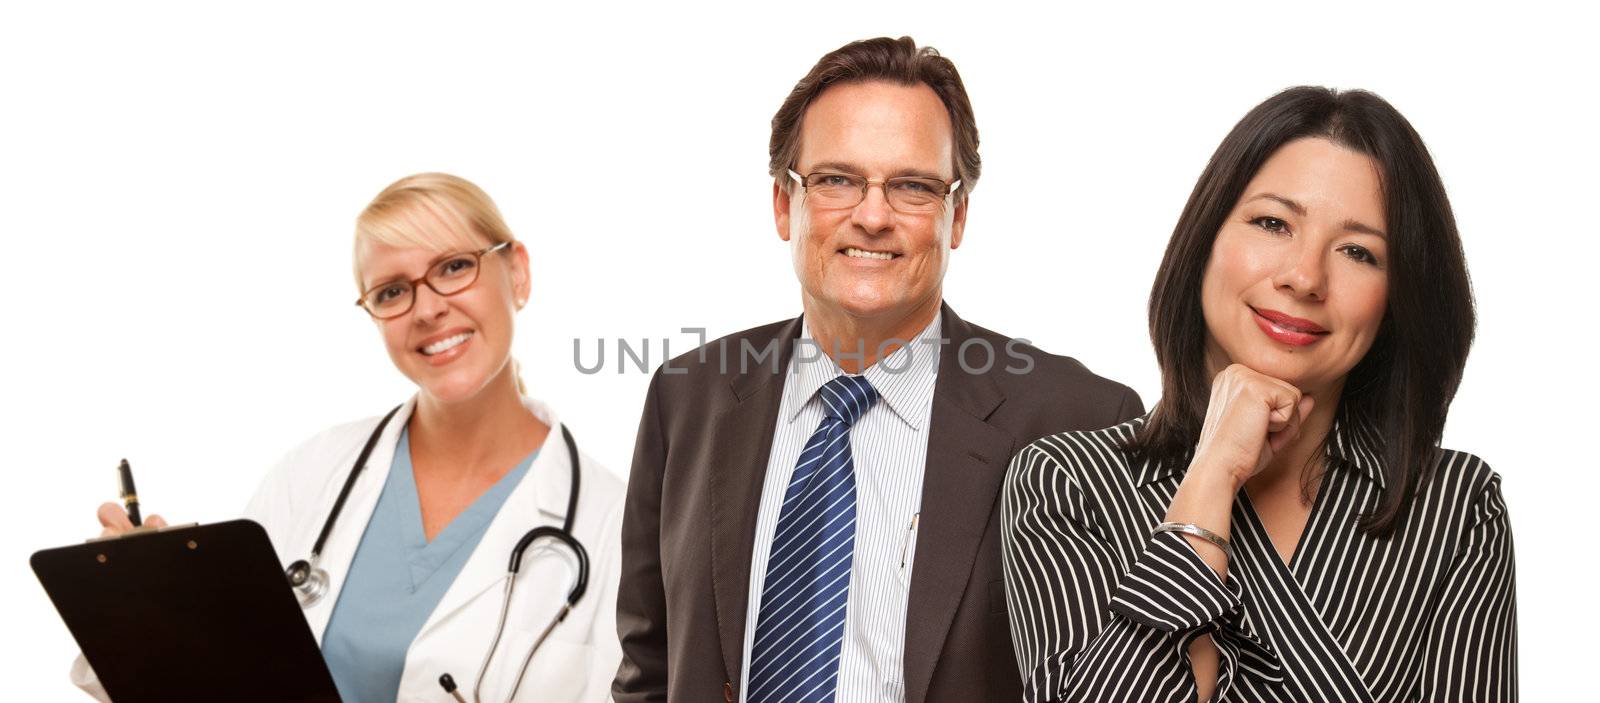 Hispanic Woman with Husband and Female Doctor by Feverpitched